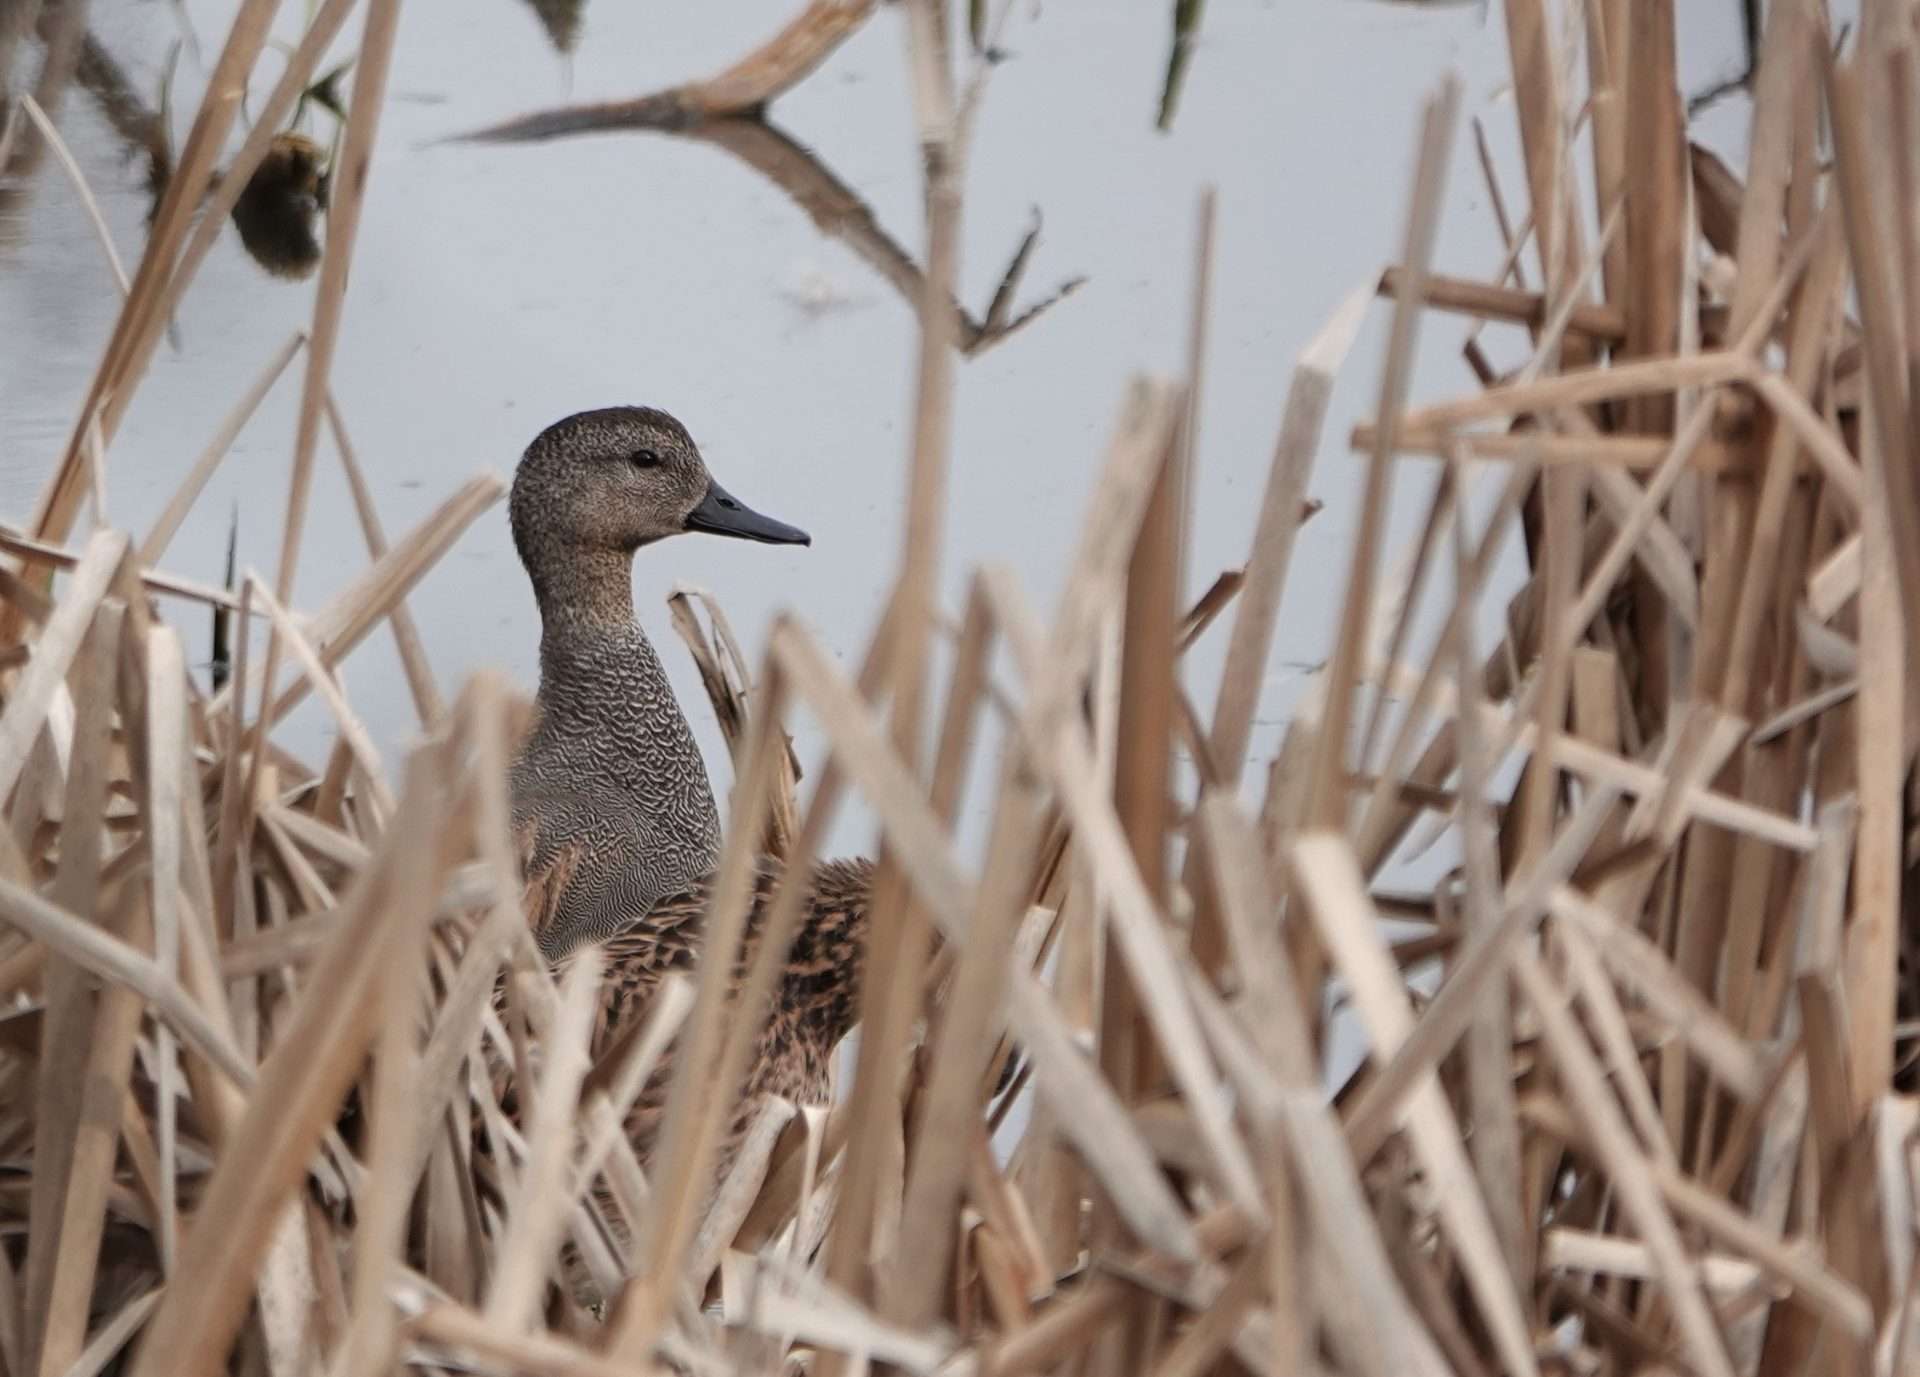 Gadwall by Paul Howrihane at Wrafton Pond